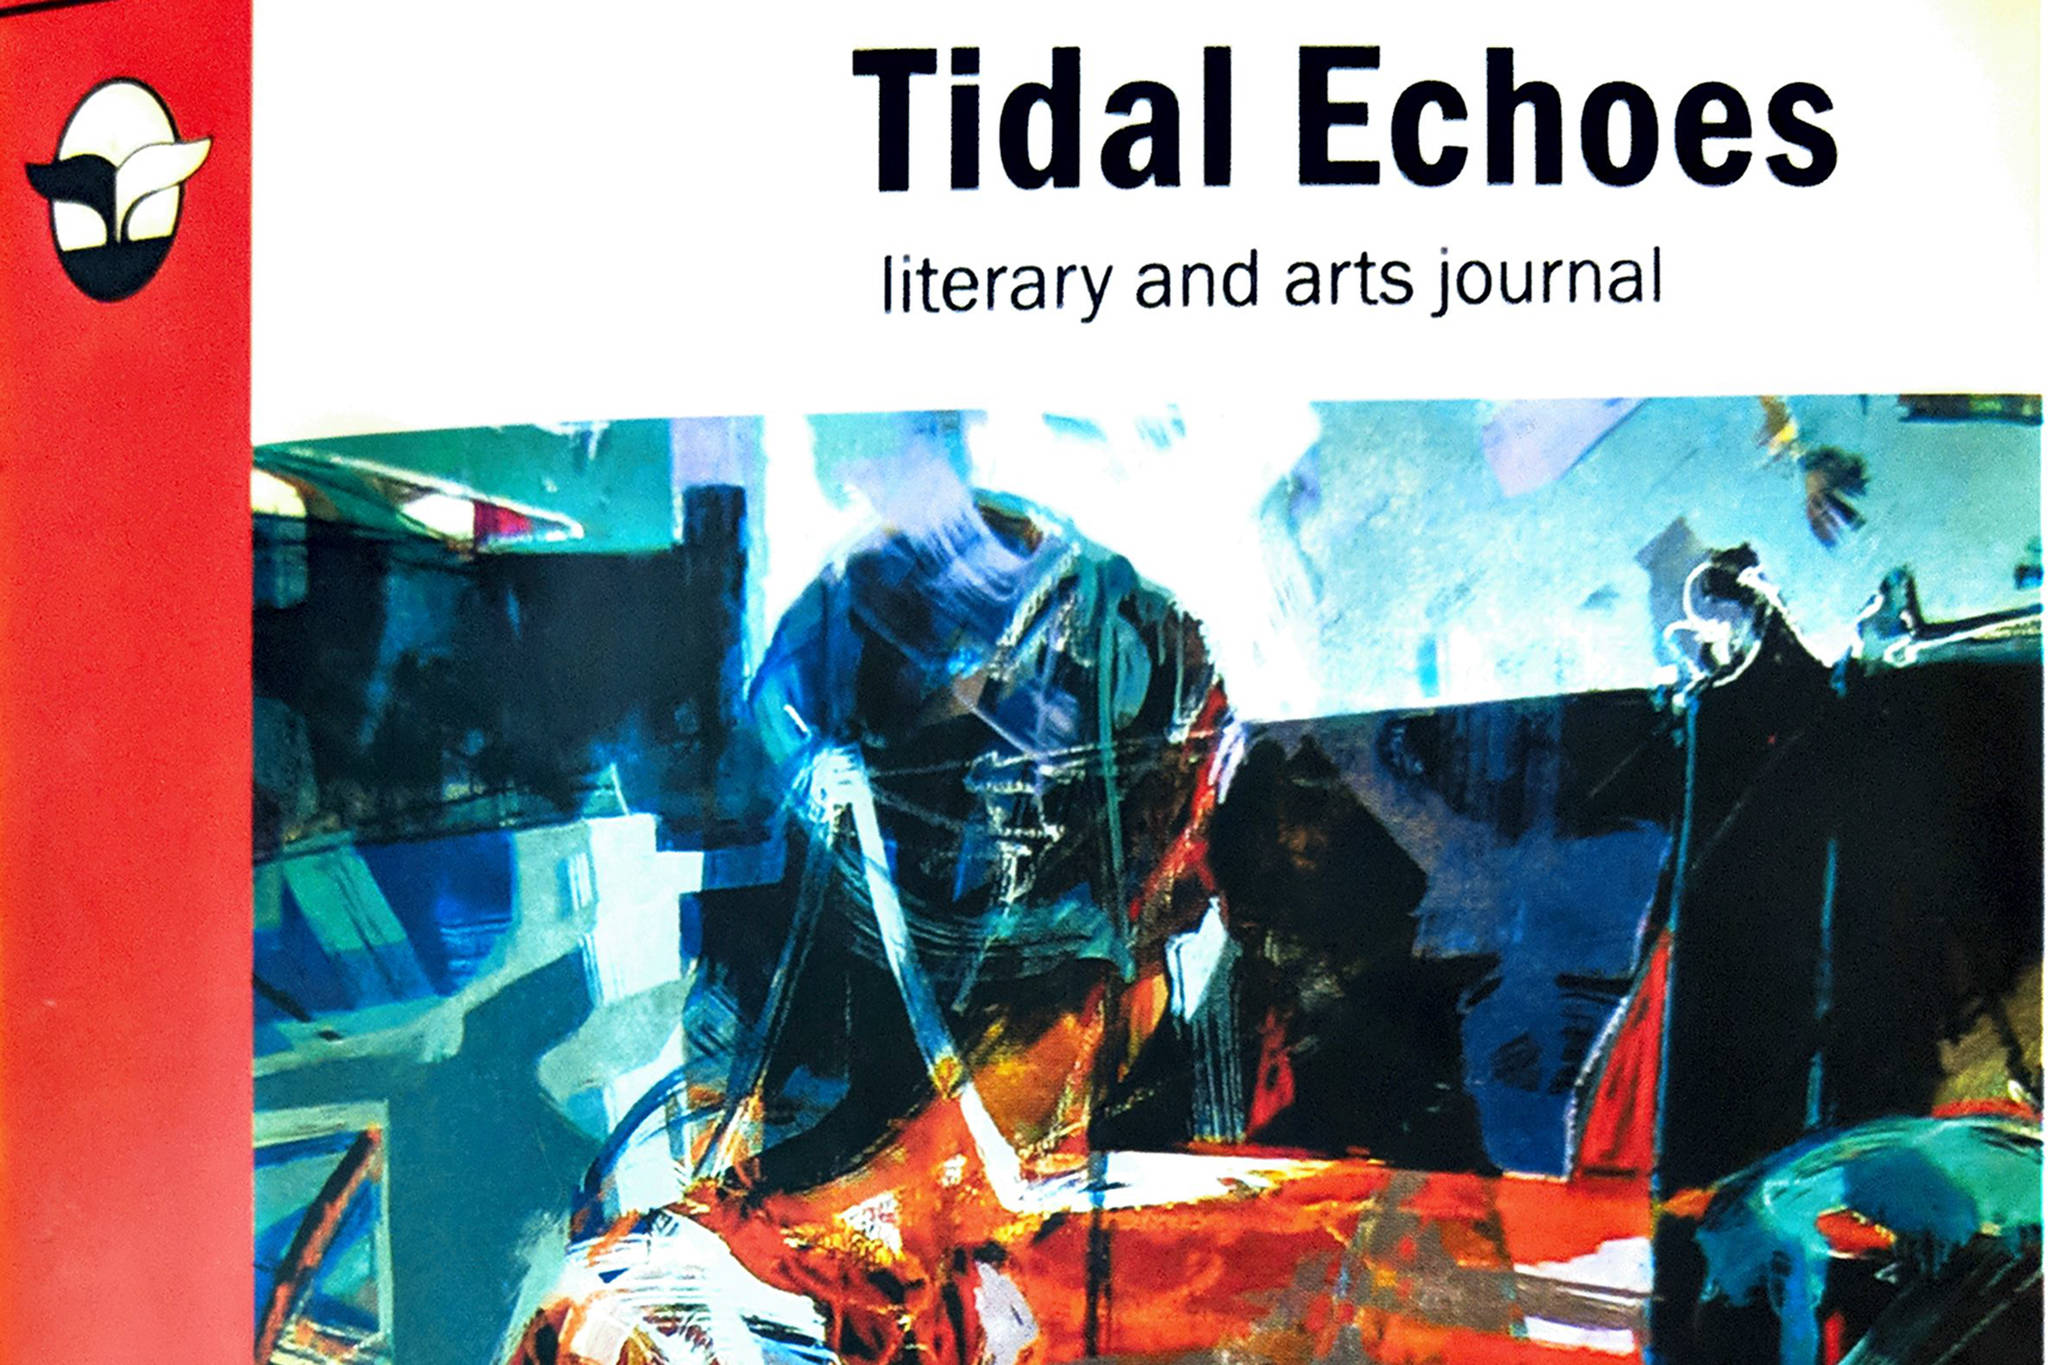 “Tidal Echoes” the literary and arts journal published by University of Alaska Southeast is seeking submissions for the edition to be published in spring of 2019. The cover of the 2018 edition came from Christofer Taylor of Juneau. (Courtesy Art | Tidal Echoes)